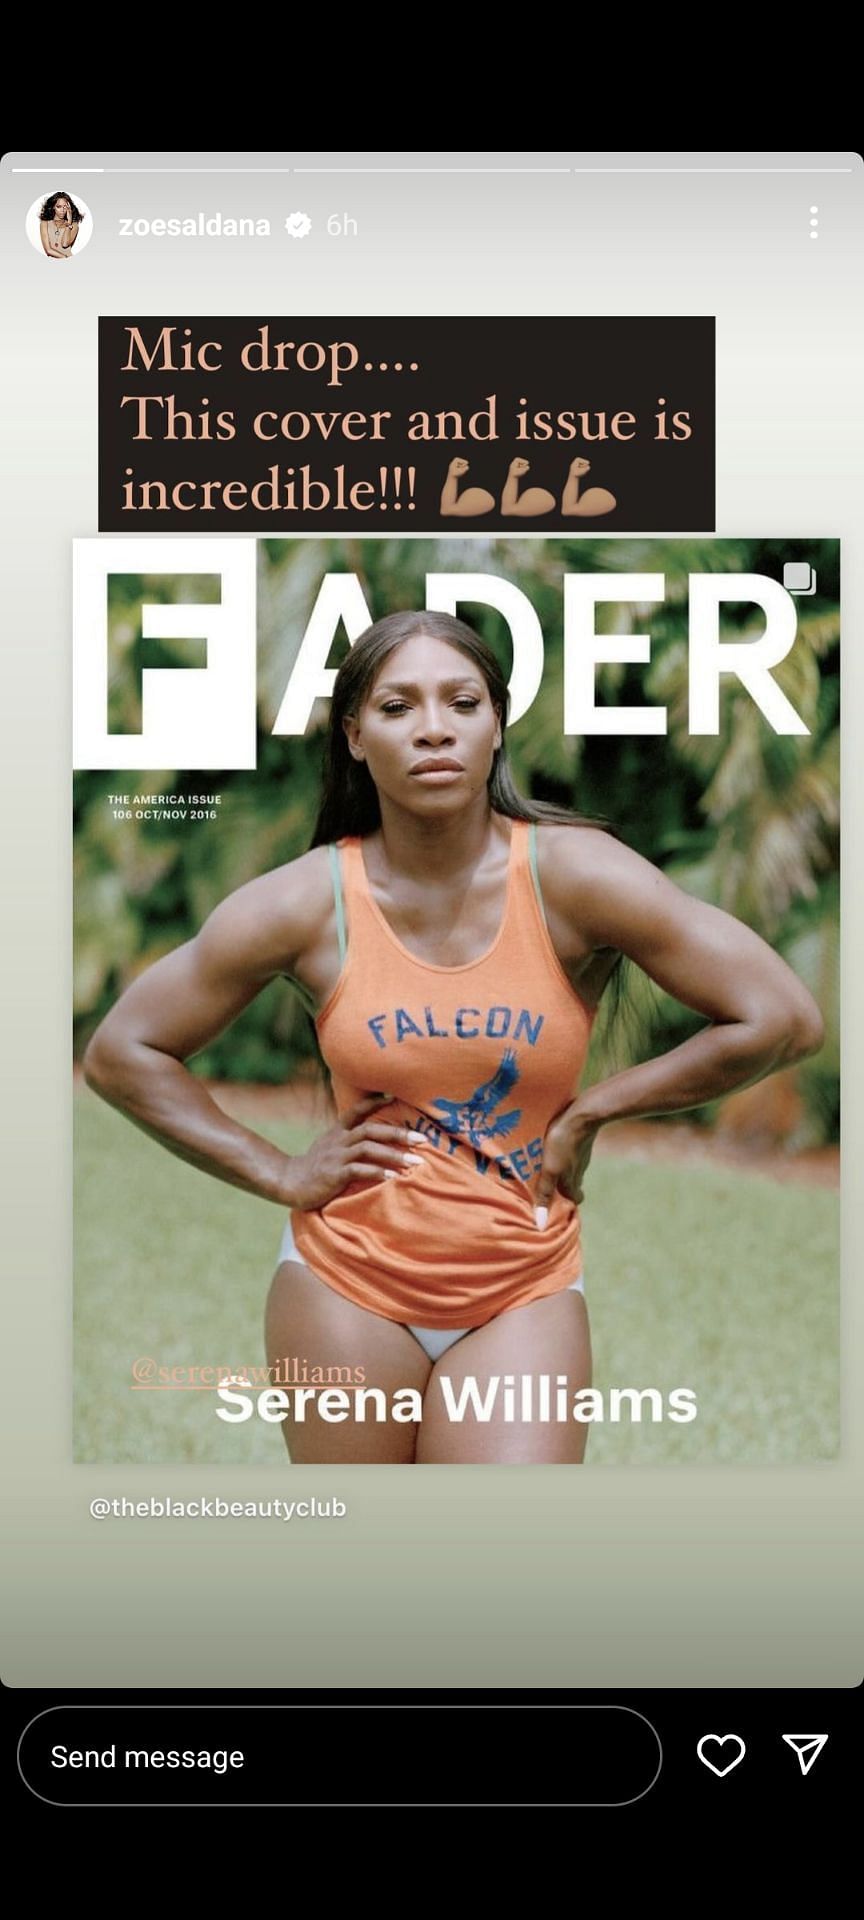 Zoe Saldana&#039;s Instagram post featuring her praise for Serena Williams&#039; cover shoot for a 2016 issue of The Fader magazine